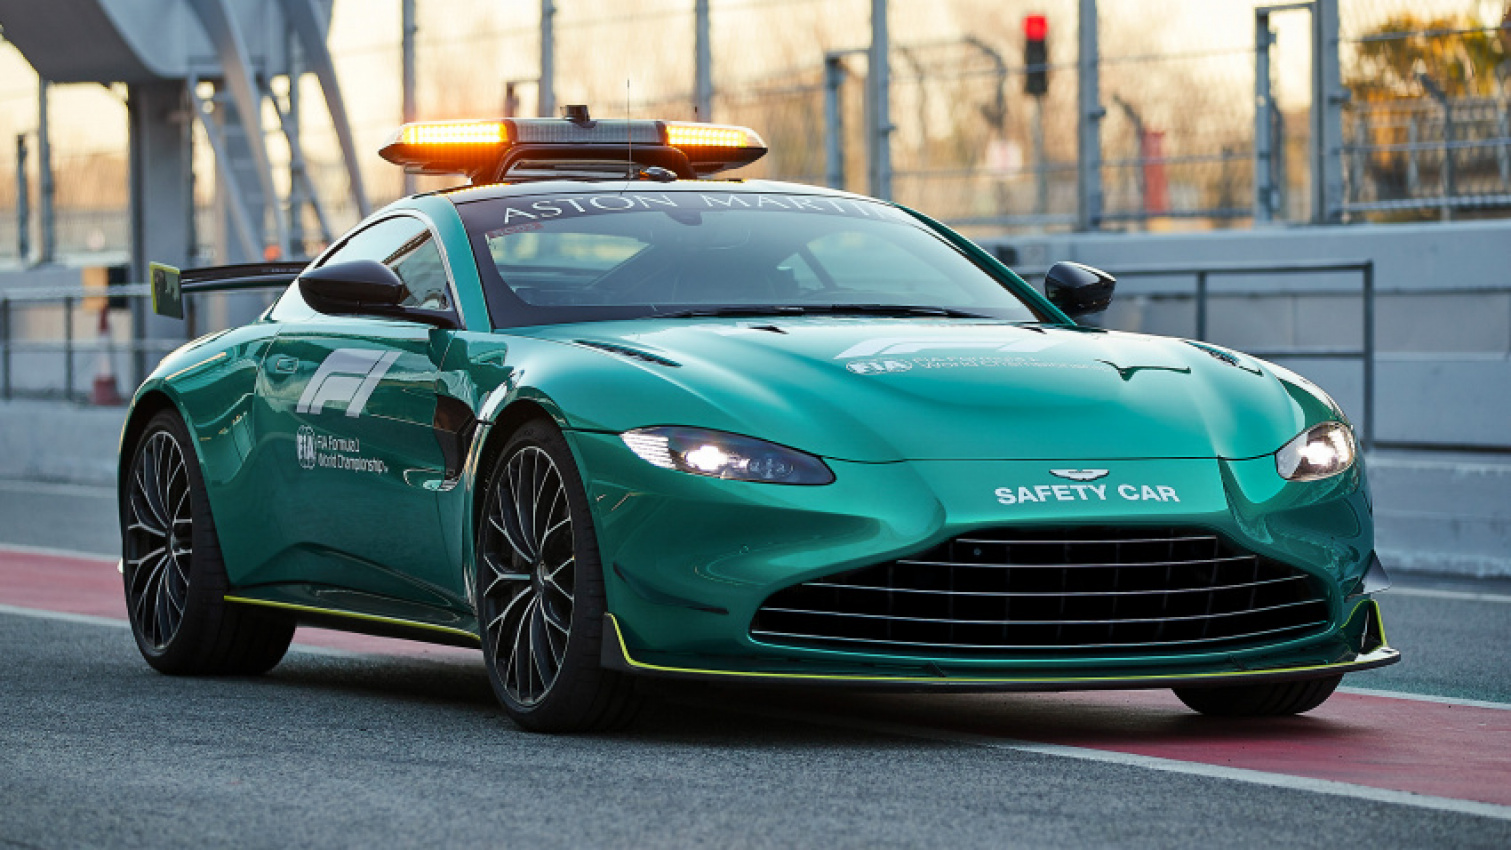 aston martin, autos, cars, f1 drivers think the aston martin safety car is too slow